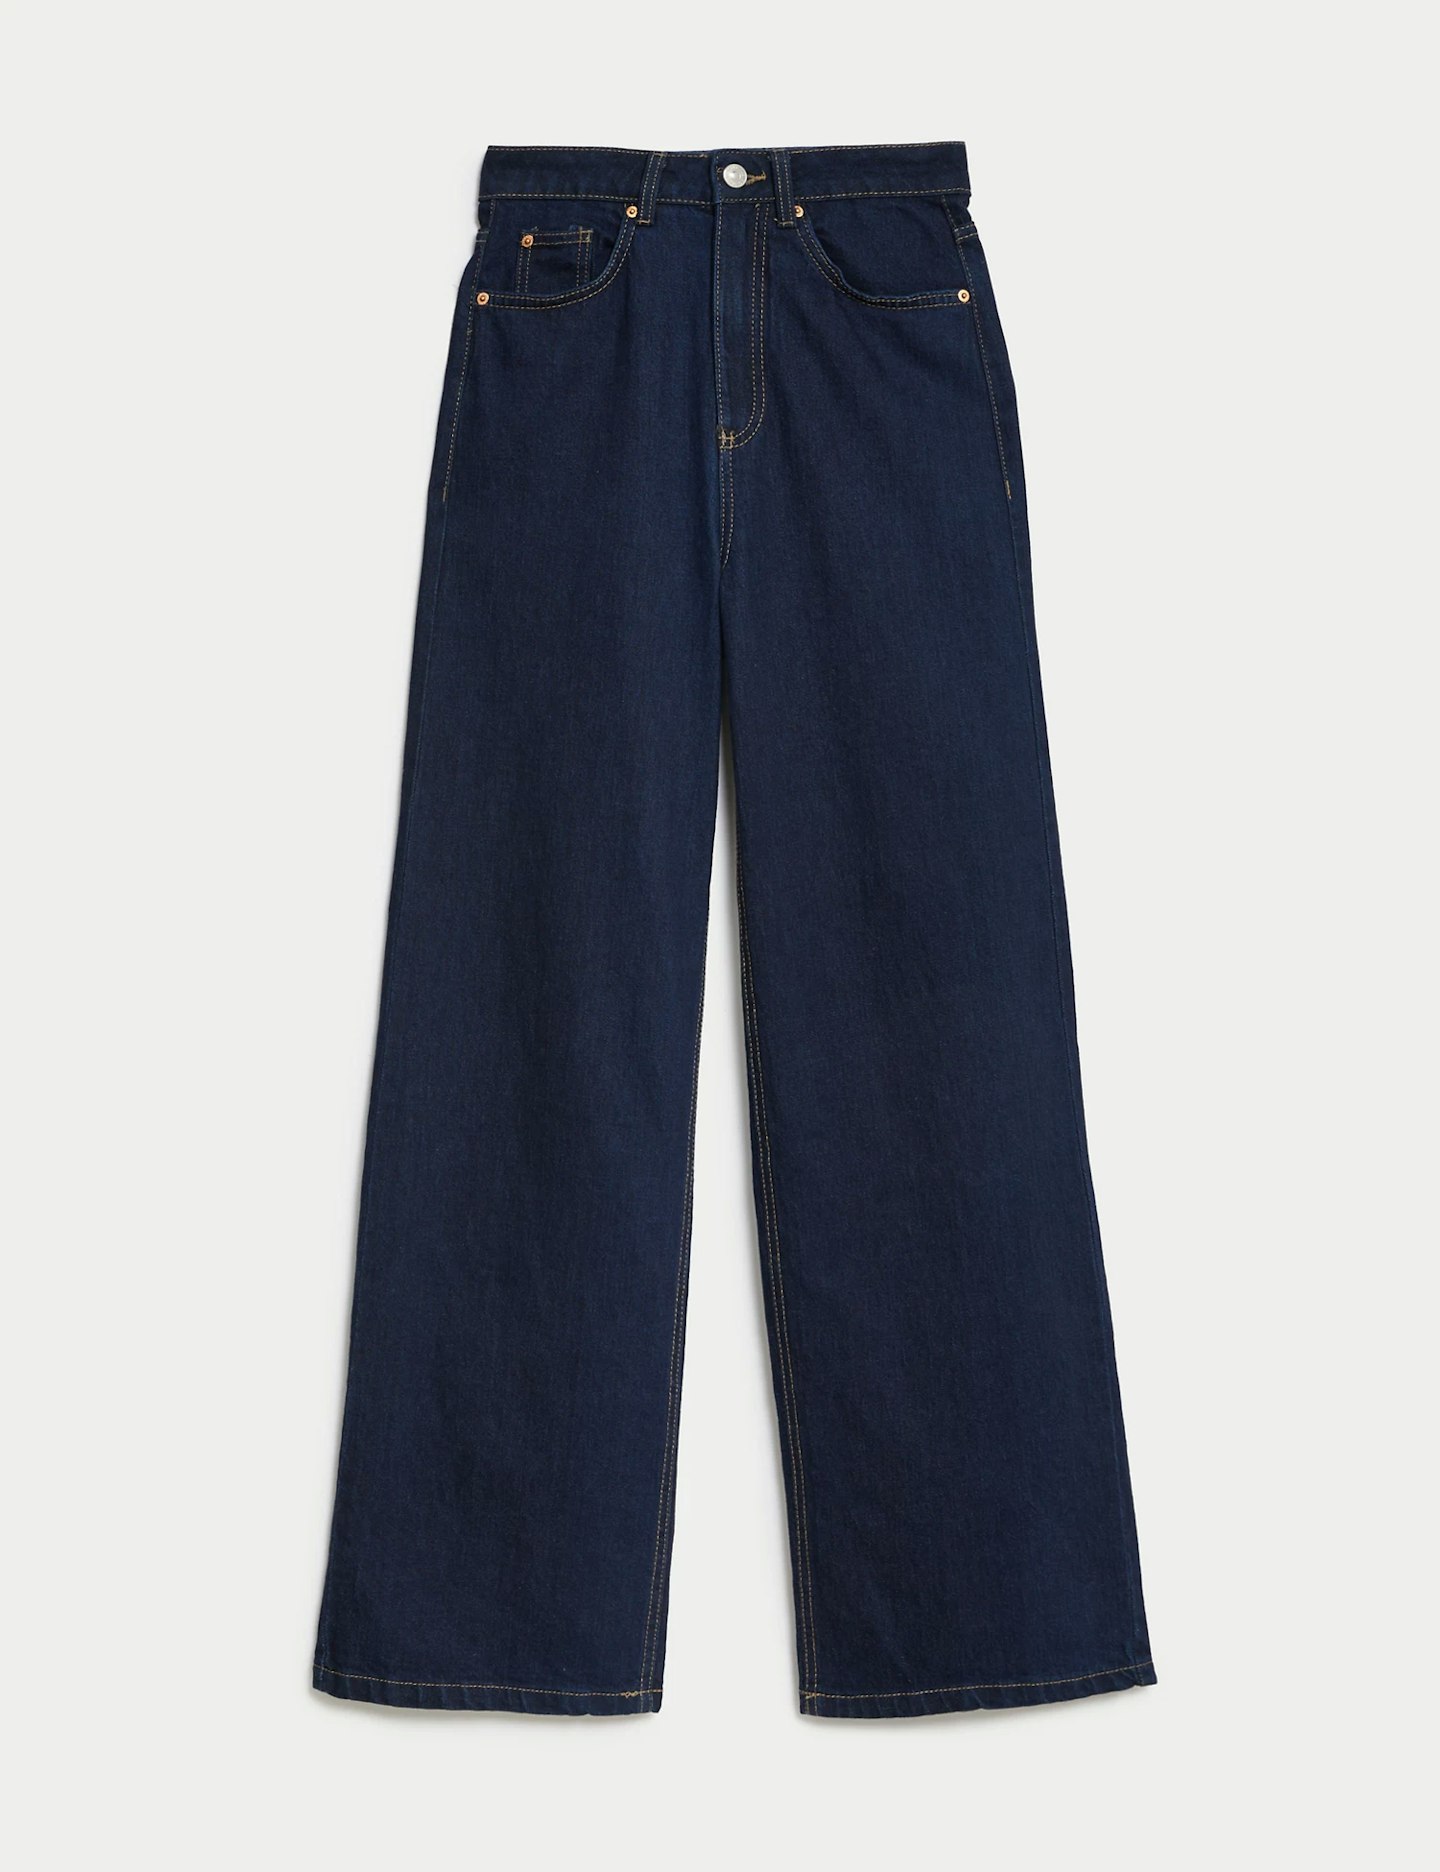 Marks And Spencer, The Wide-Leg Jean